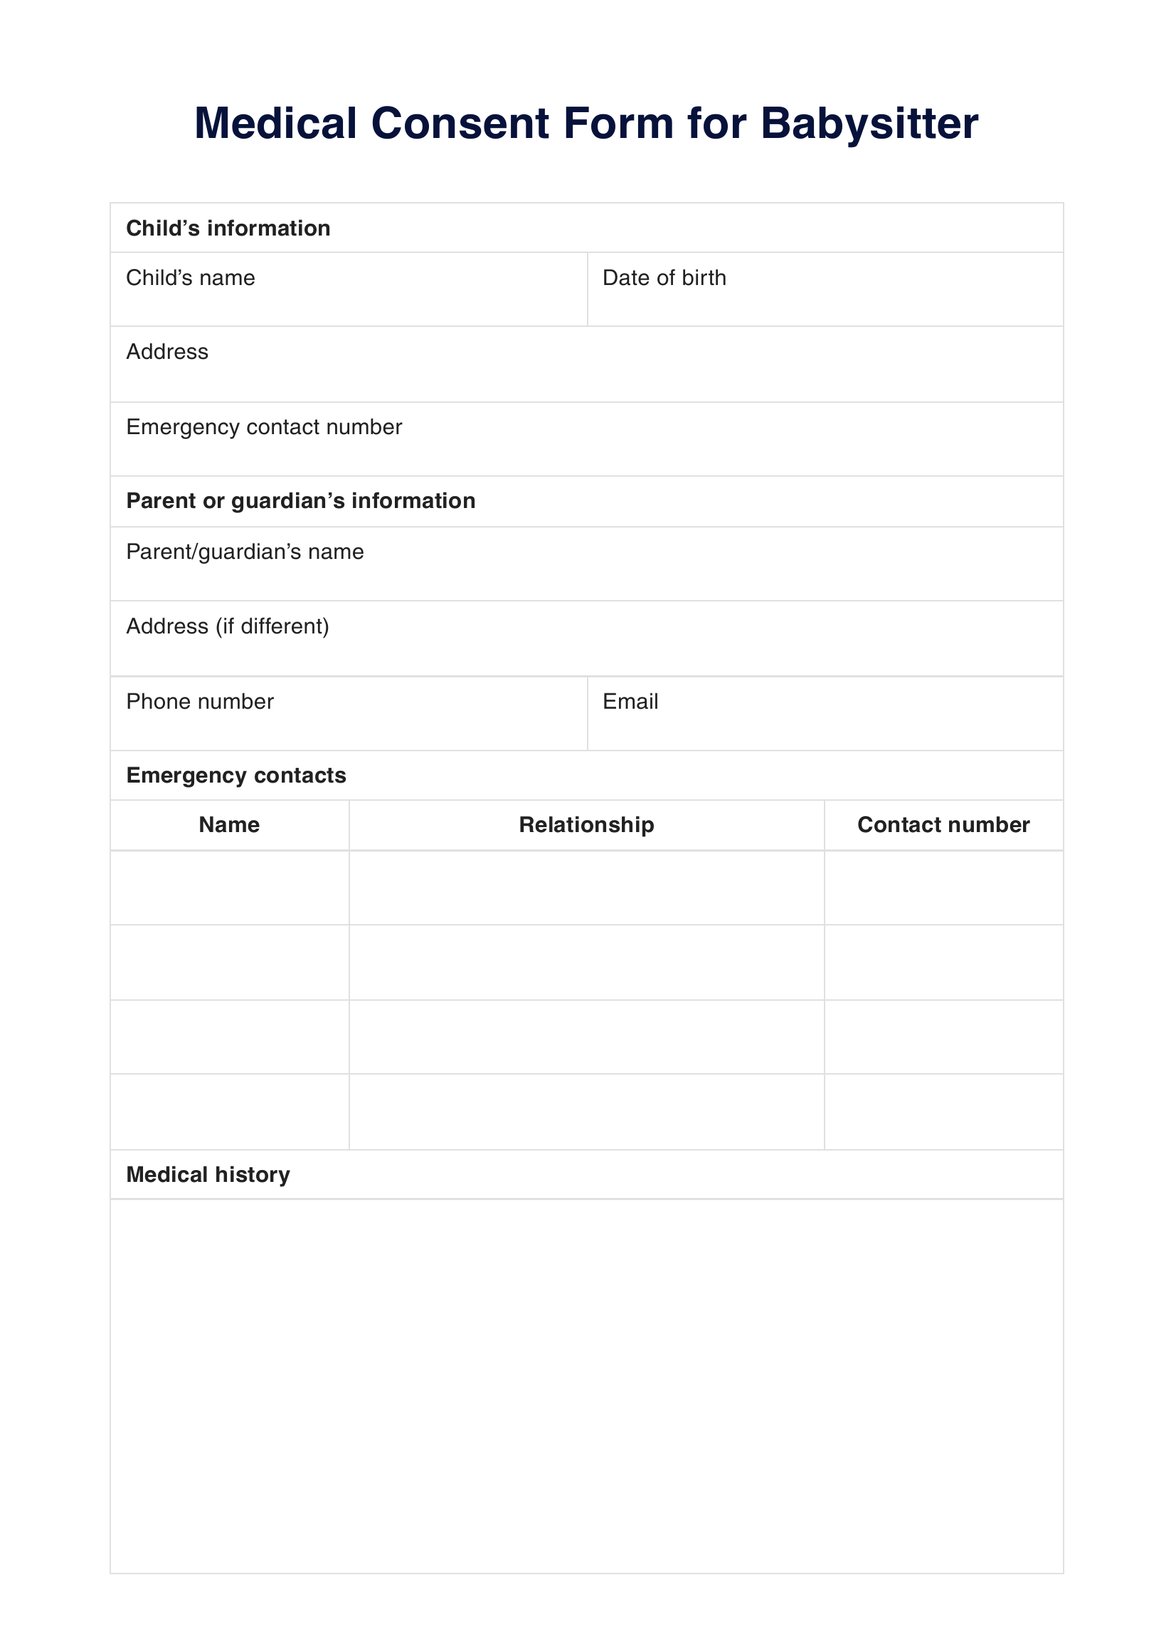 Medical Consent Form for Babysitter PDF Example